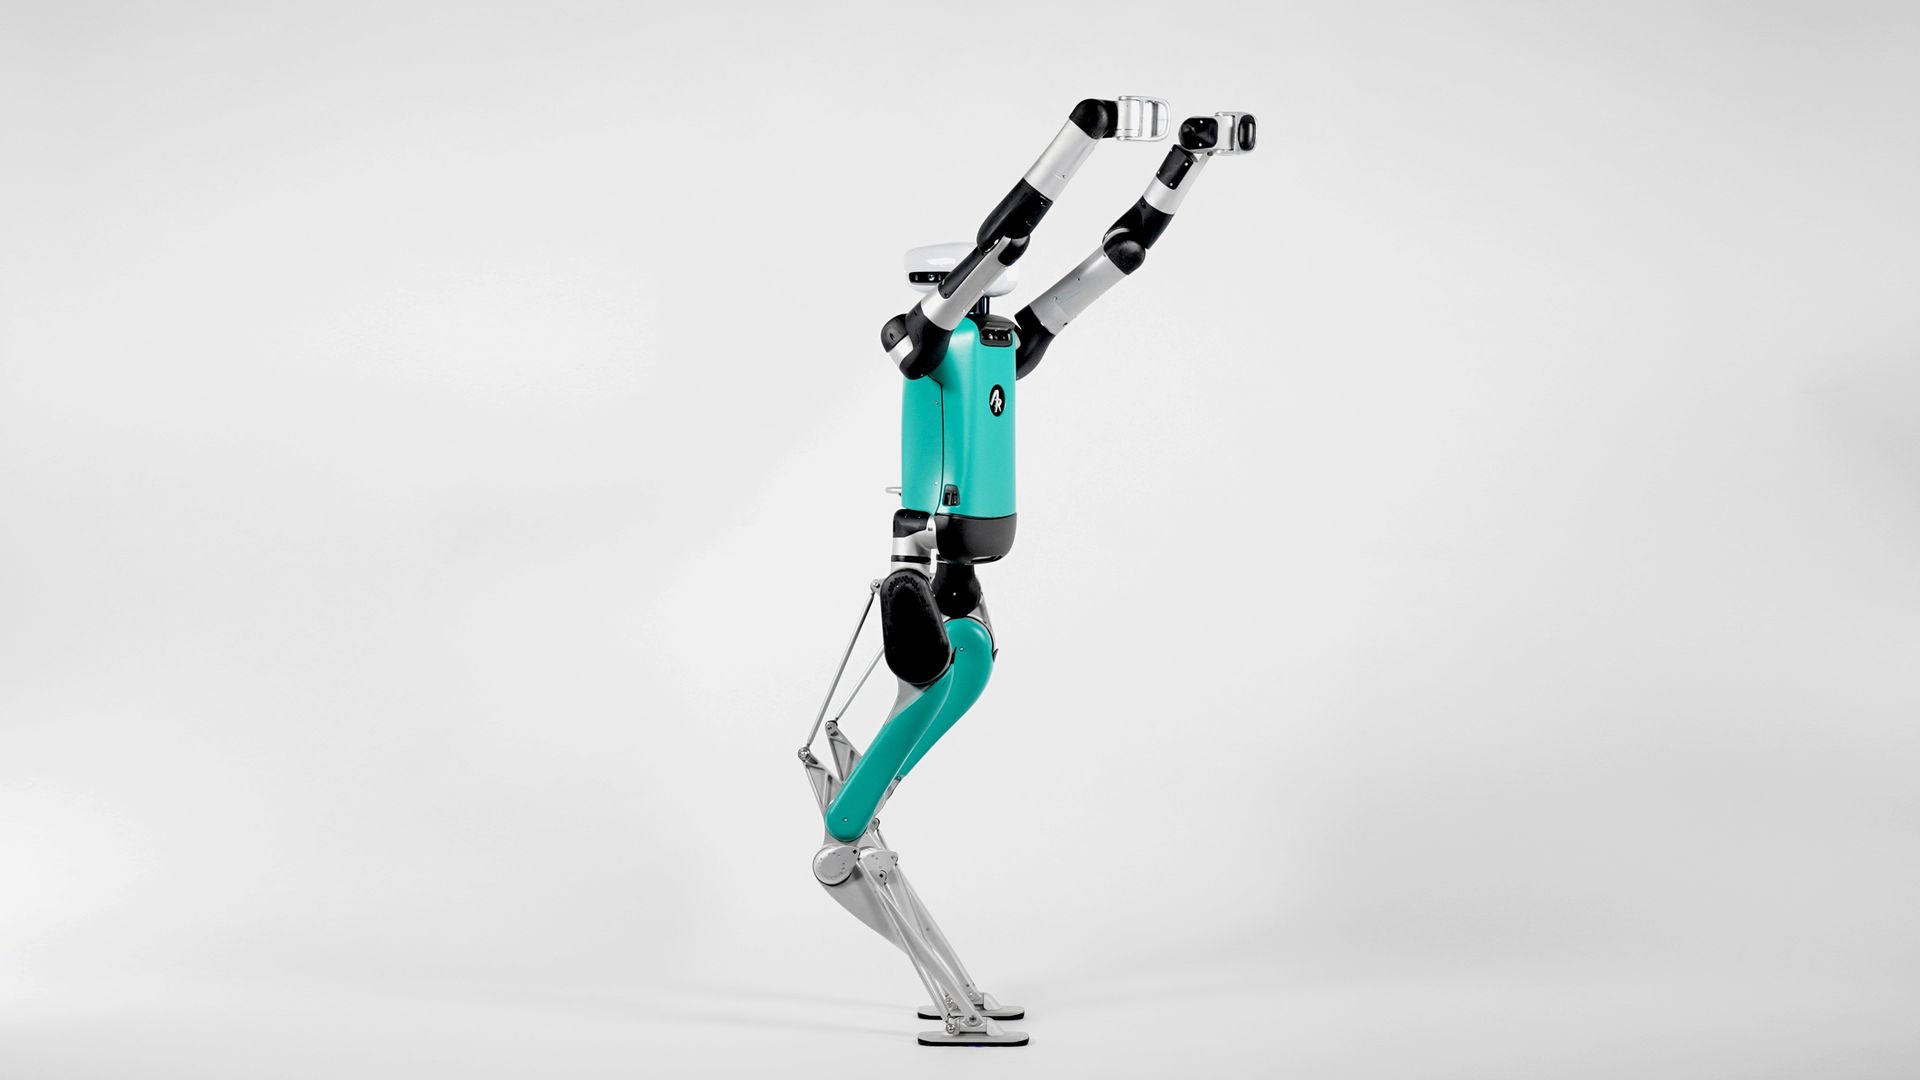 A humanoid robot perched on two legs and reaching upwards with its arms.